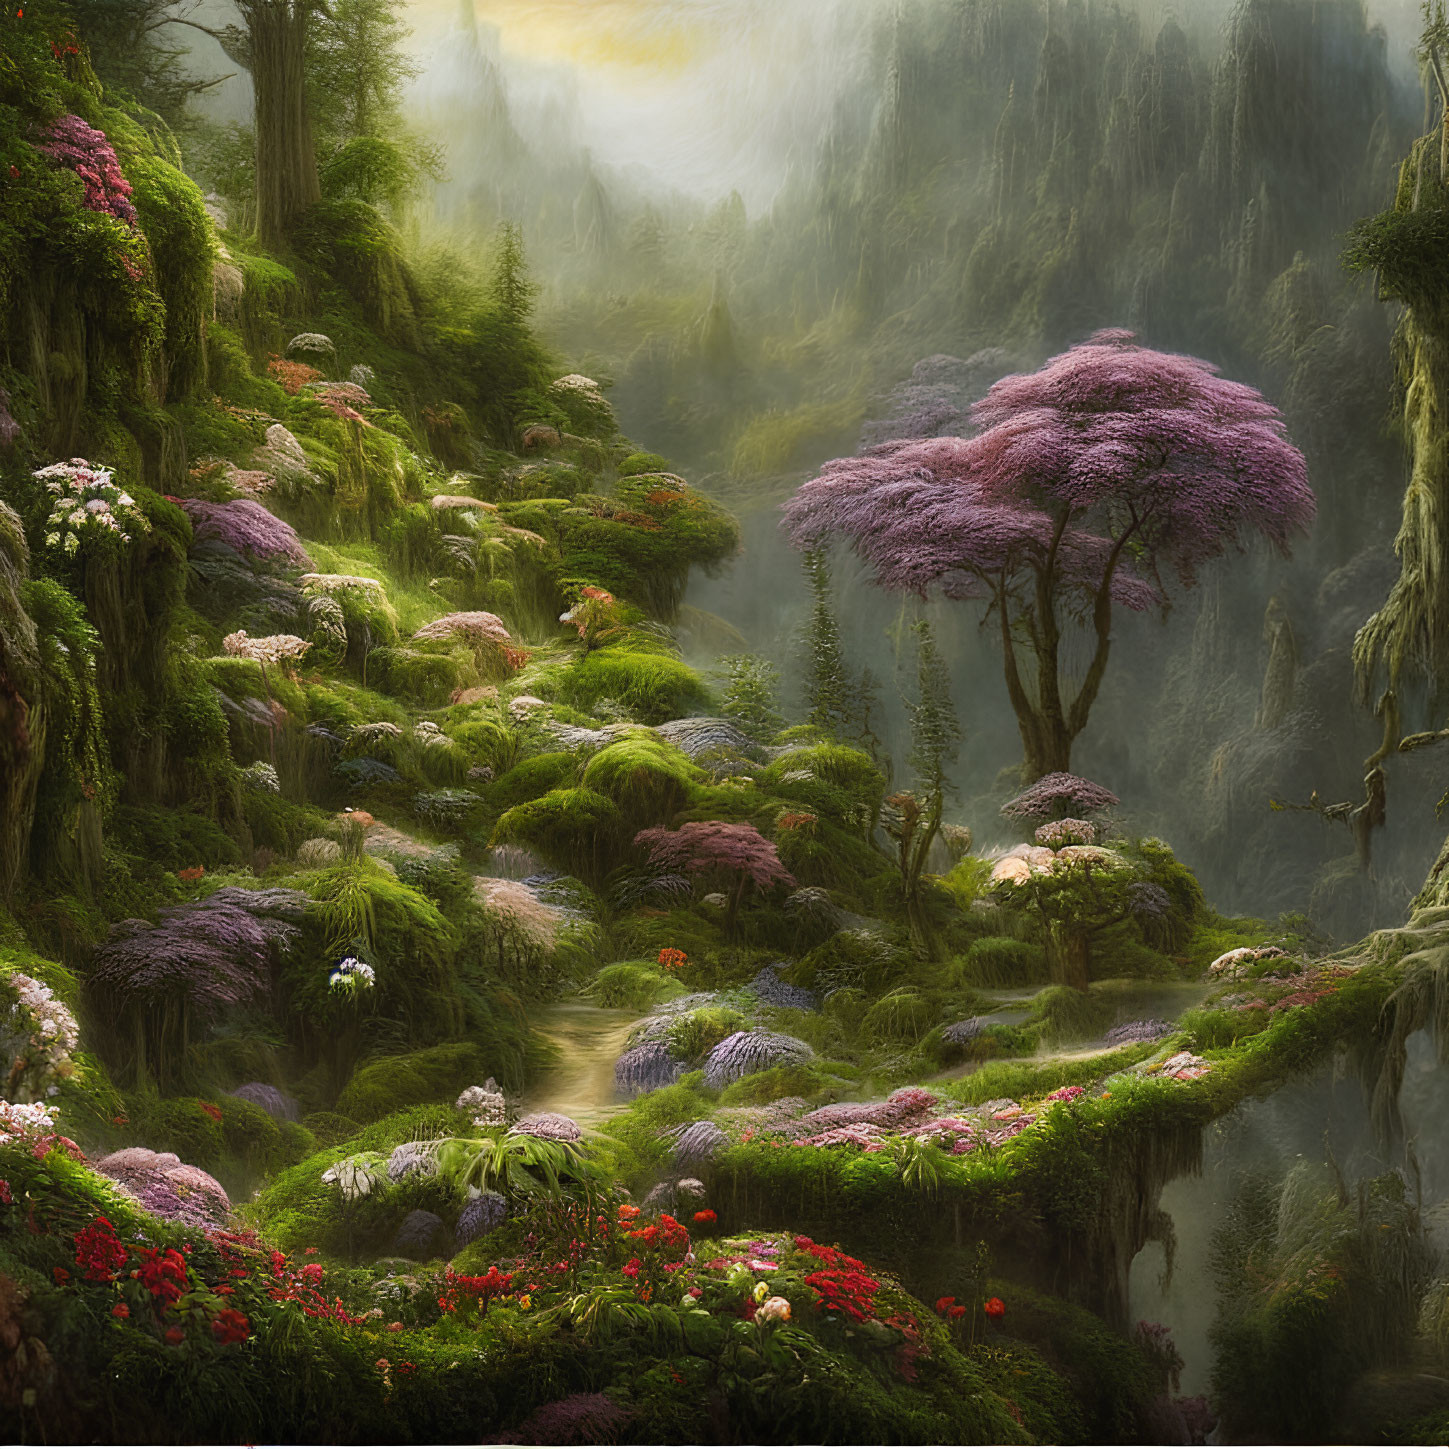 Lush forest scene with moss, flowers, mist, and pink tree in golden light